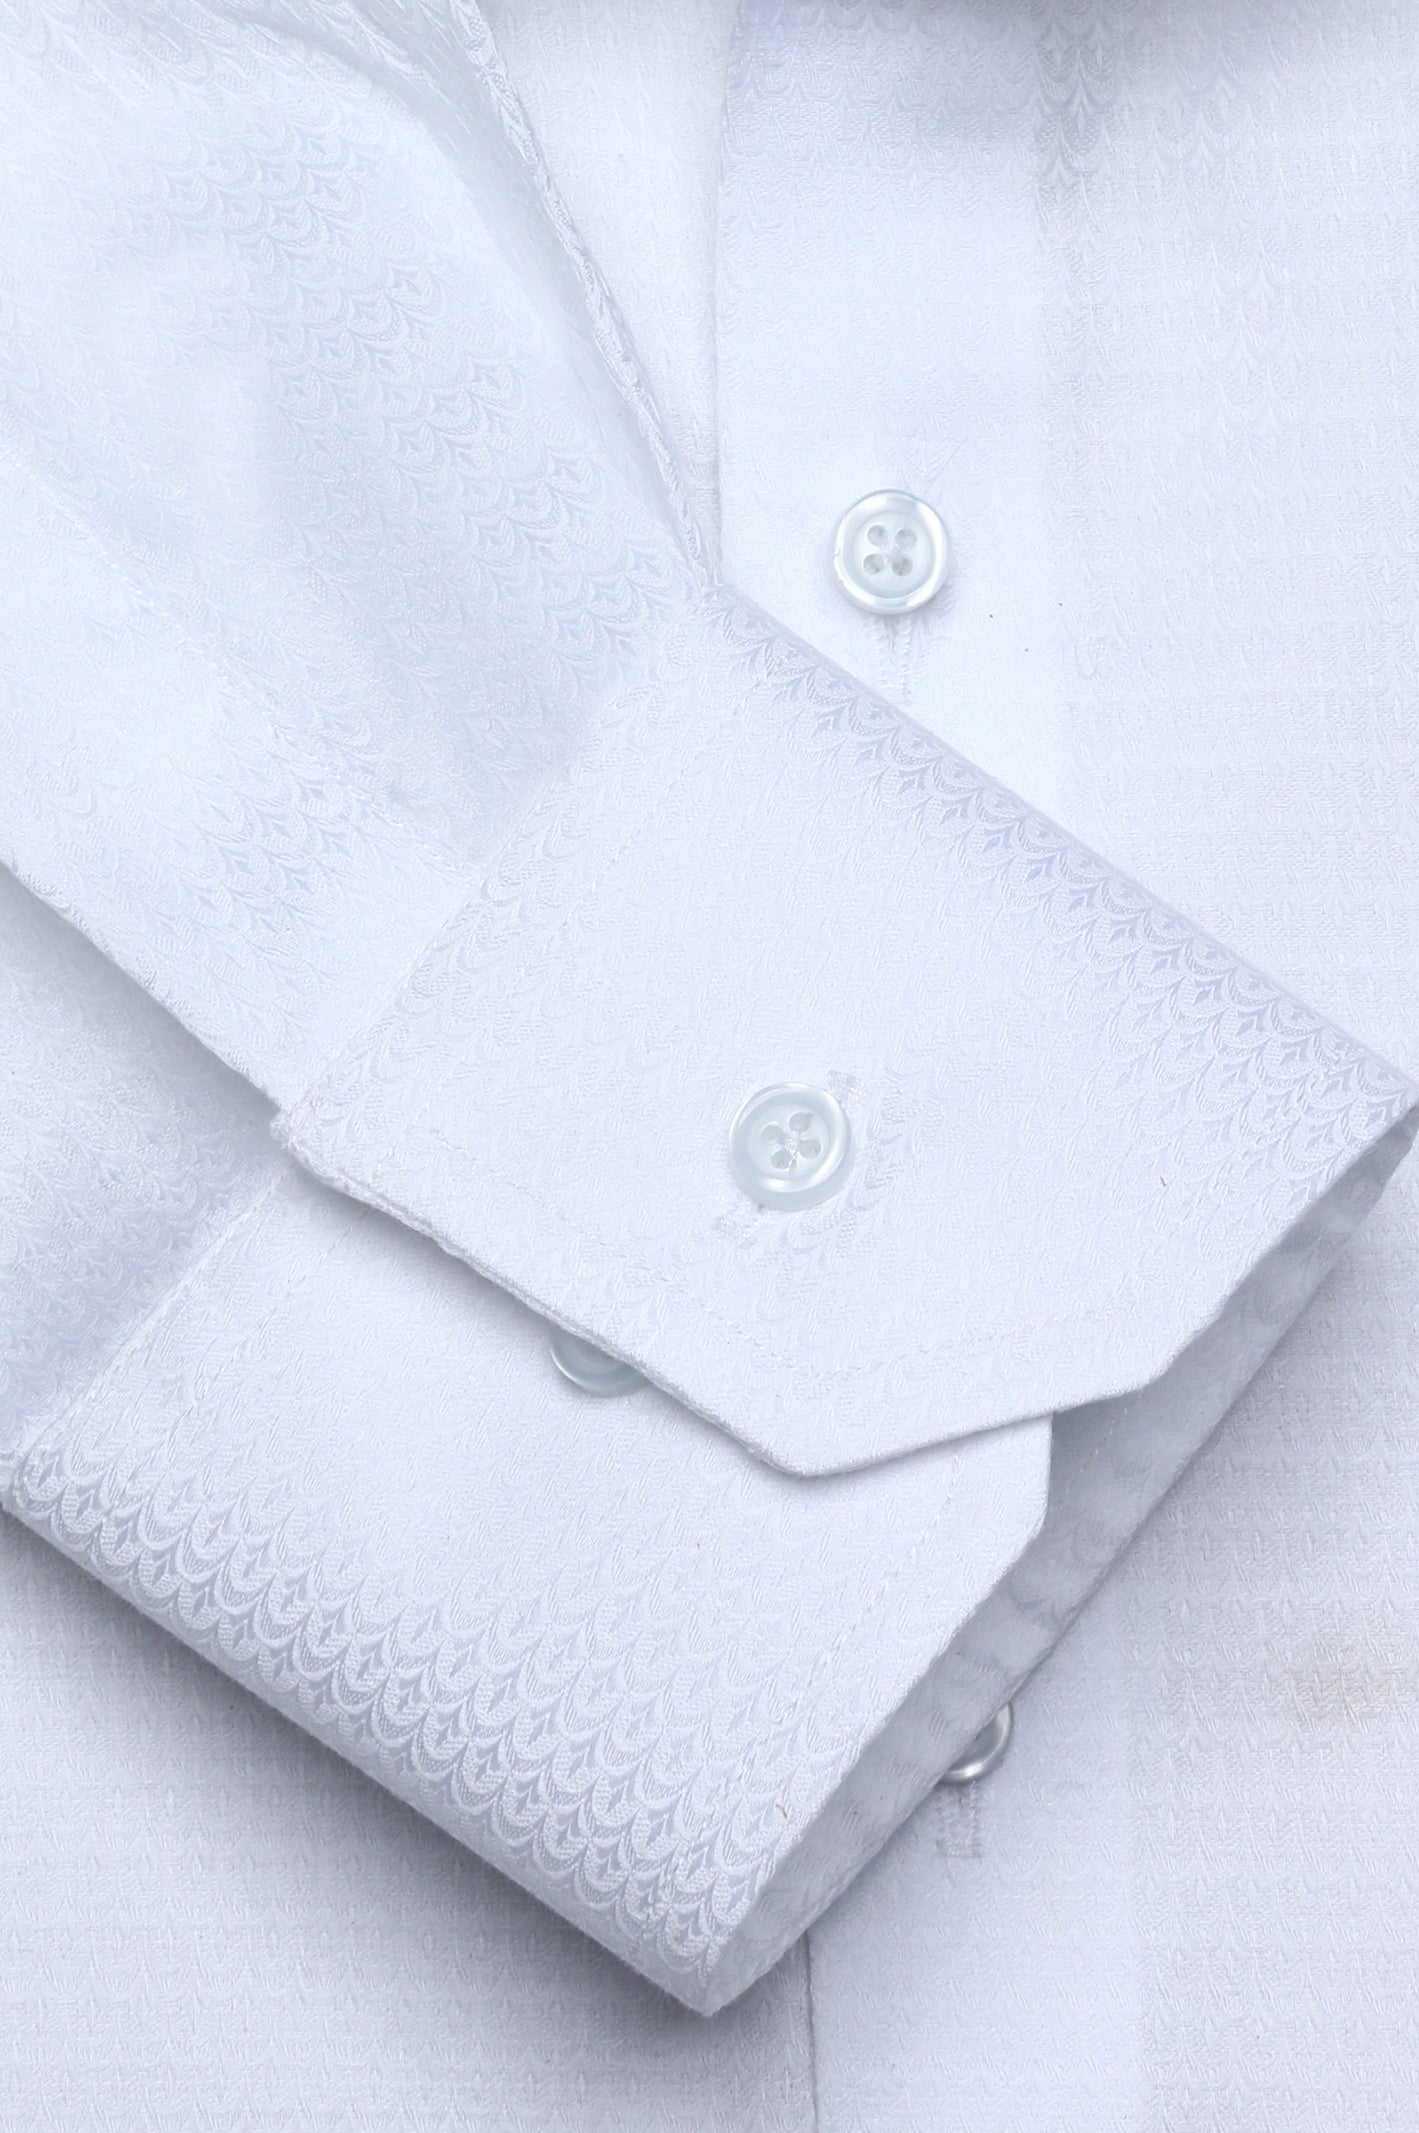 White Texture Formal Shirt For Men - Diners